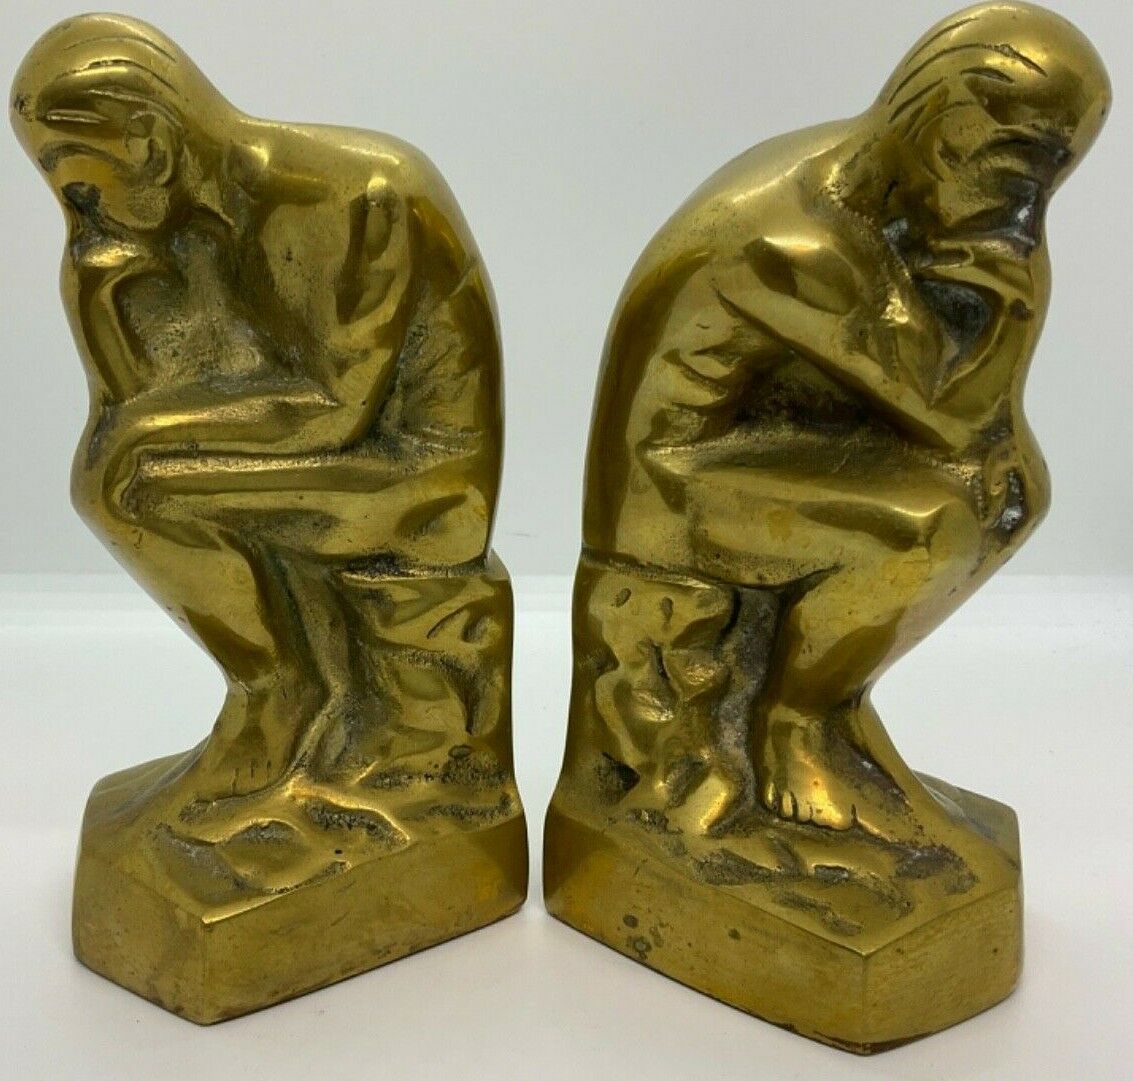 Vintage Brass Bookends Male Pair Modeled After Rodin’s The Thinker Library Books